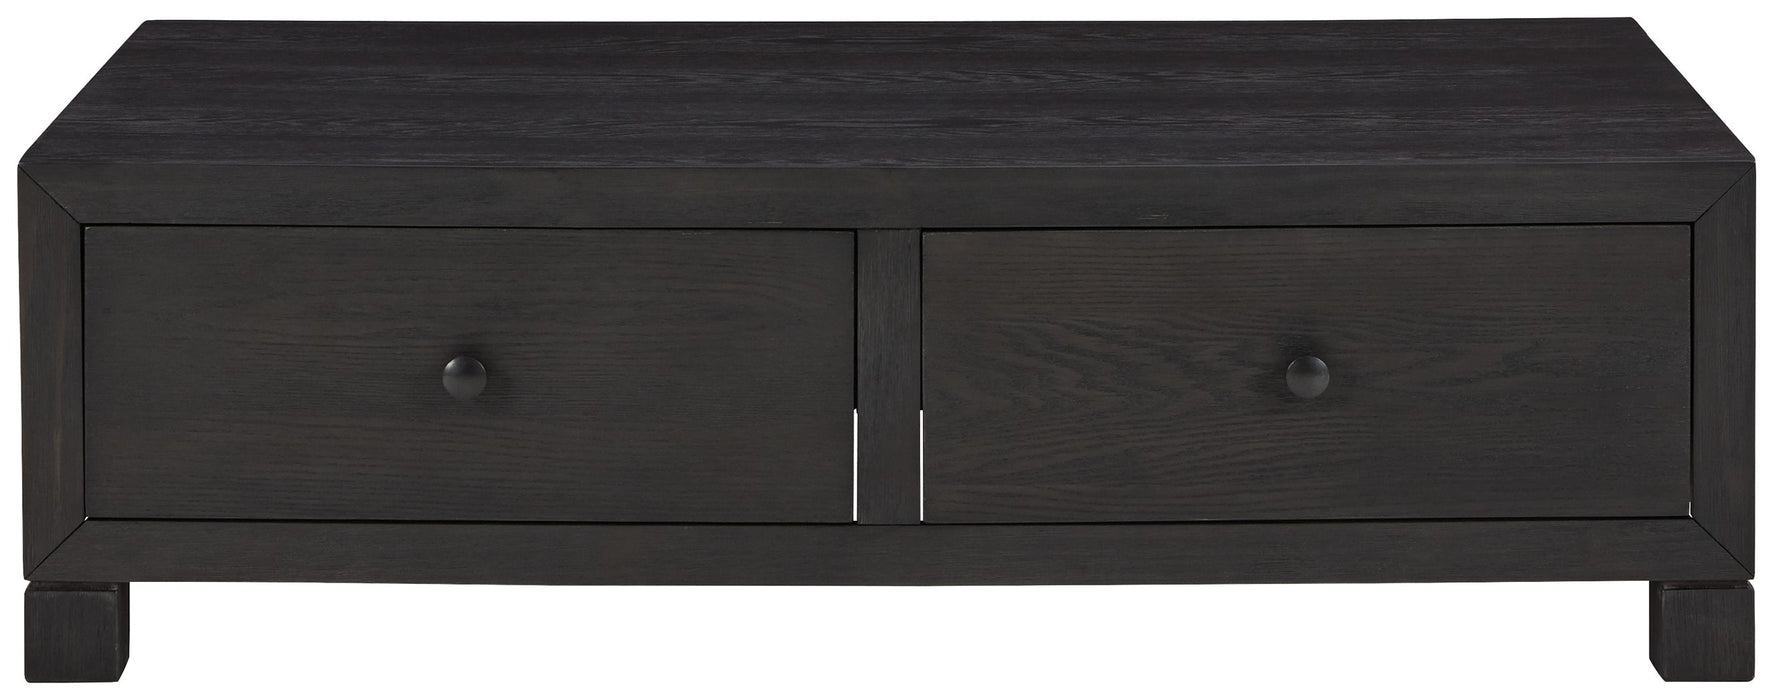 Foyland - Black - Cocktail Table With Storage